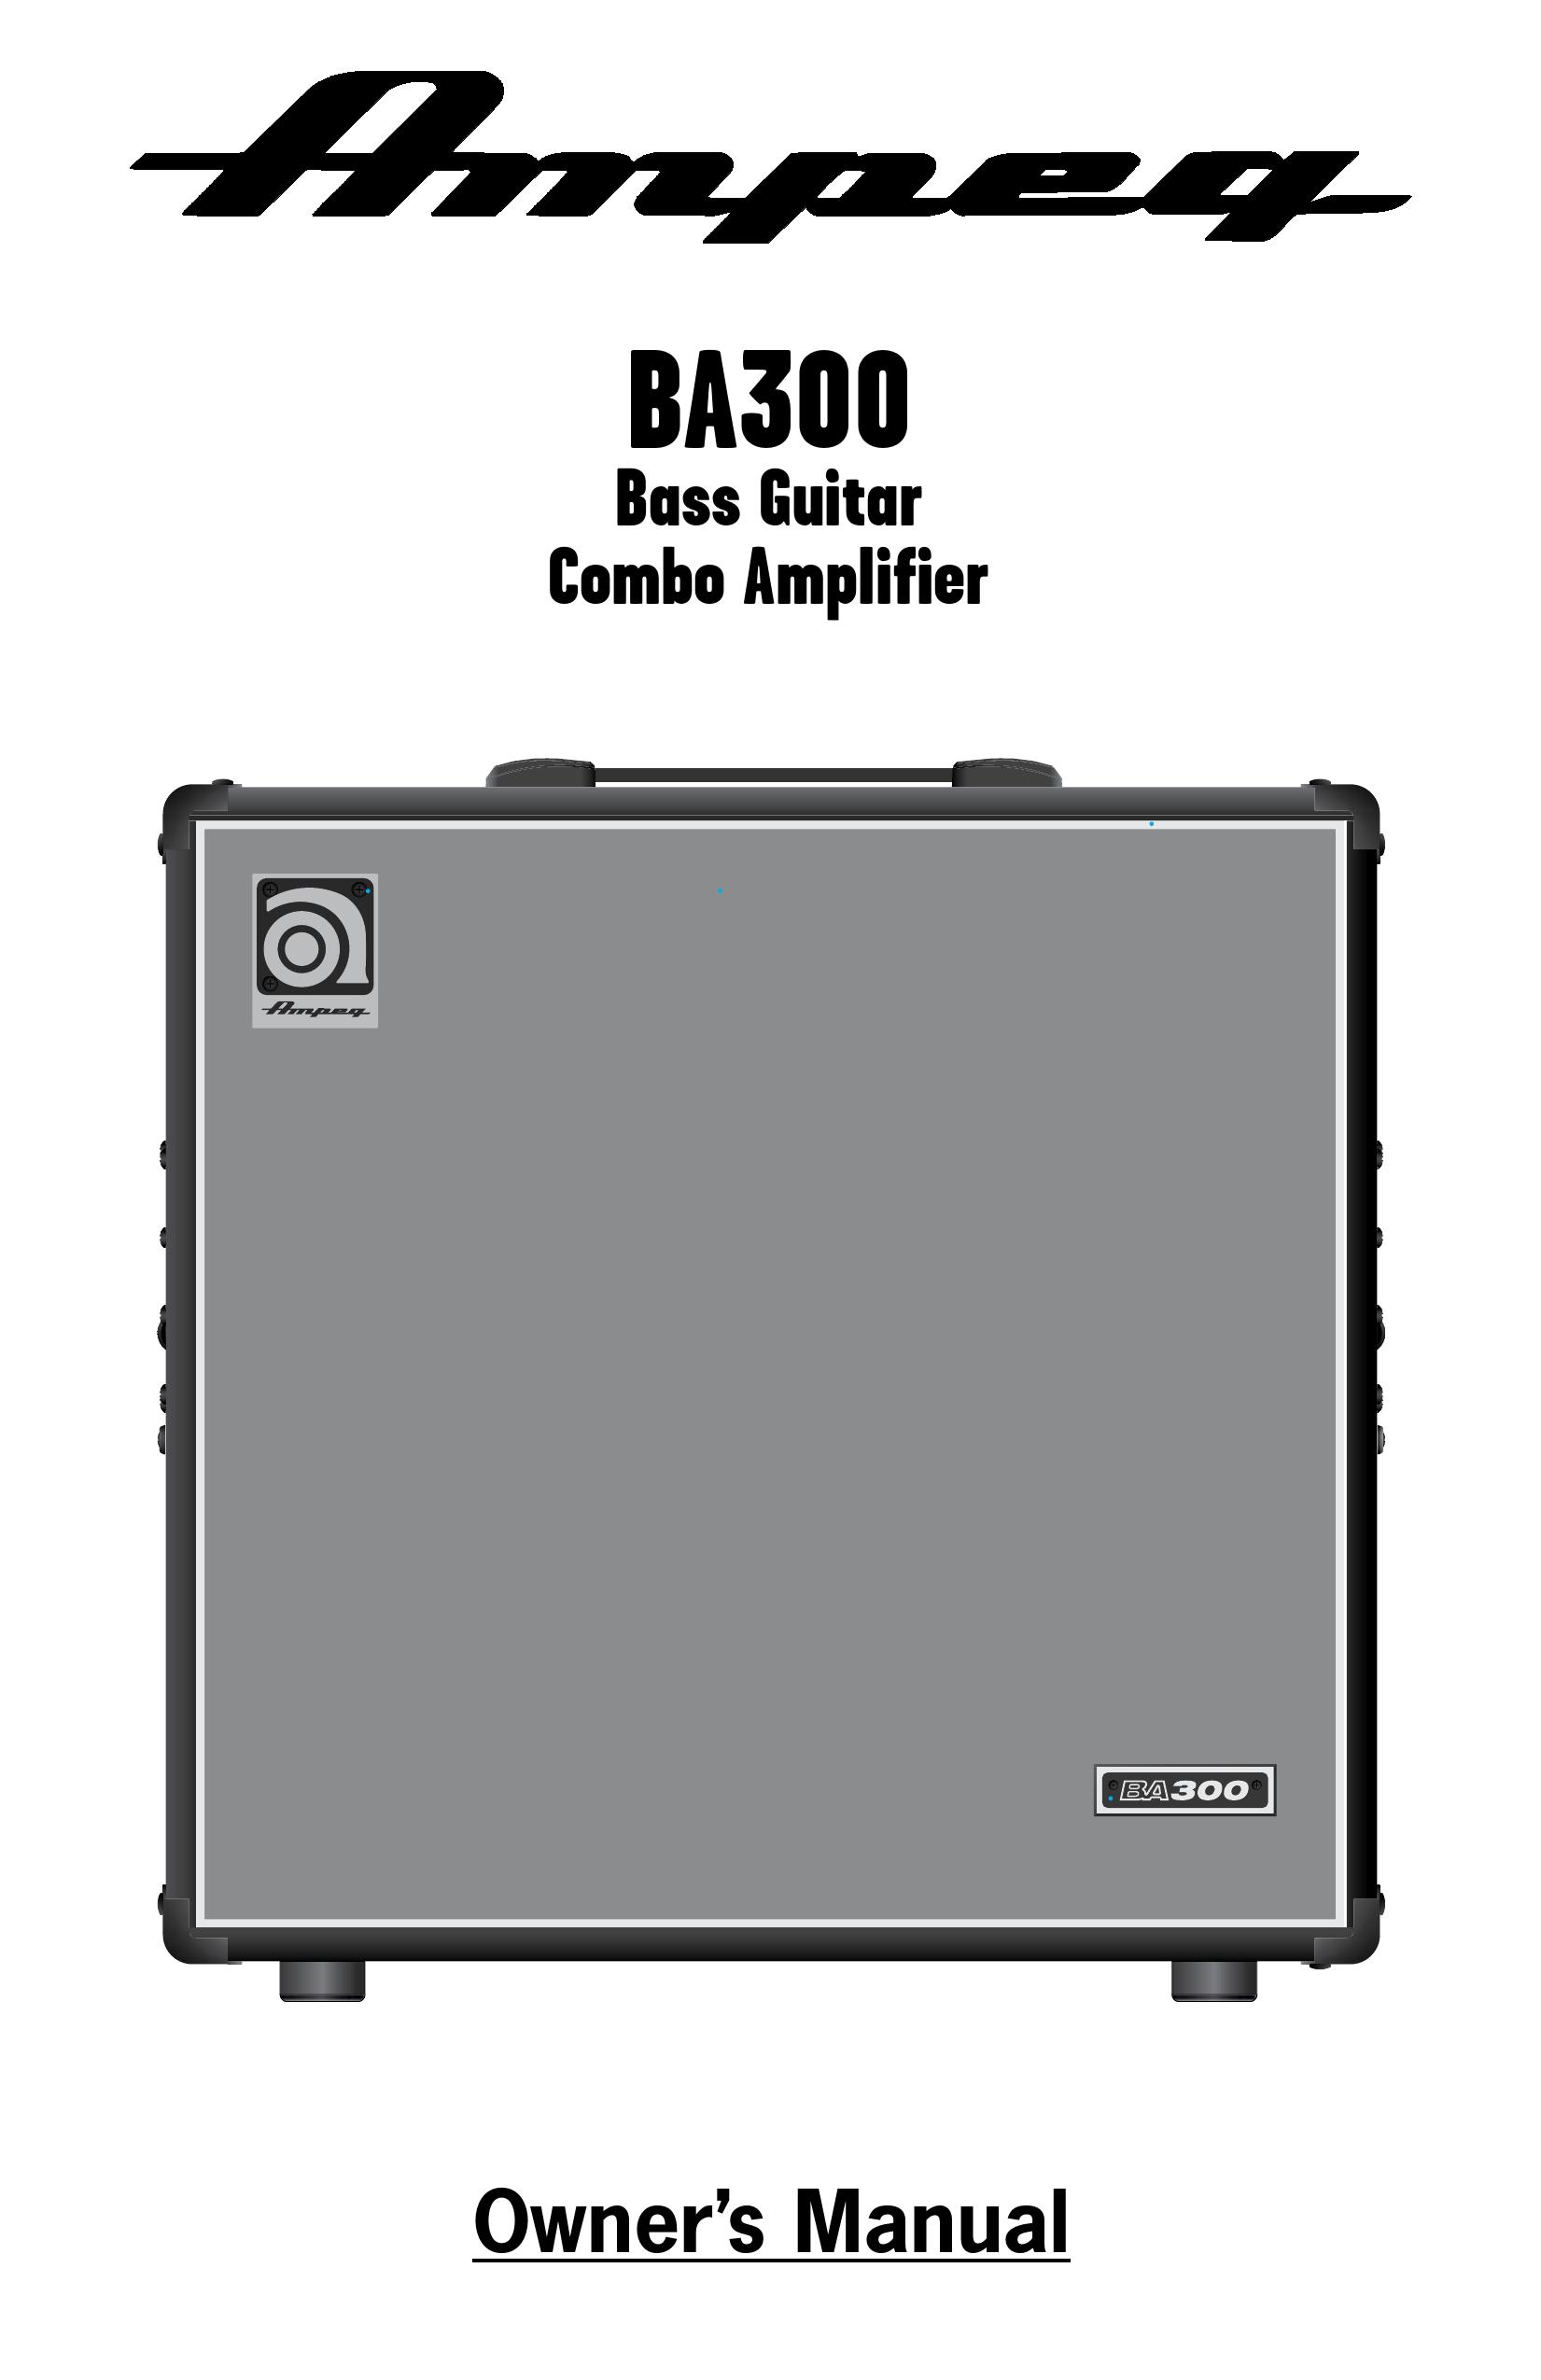 Ampeg BA300 Musical Instrument Amplifier User Manual (Page 1)